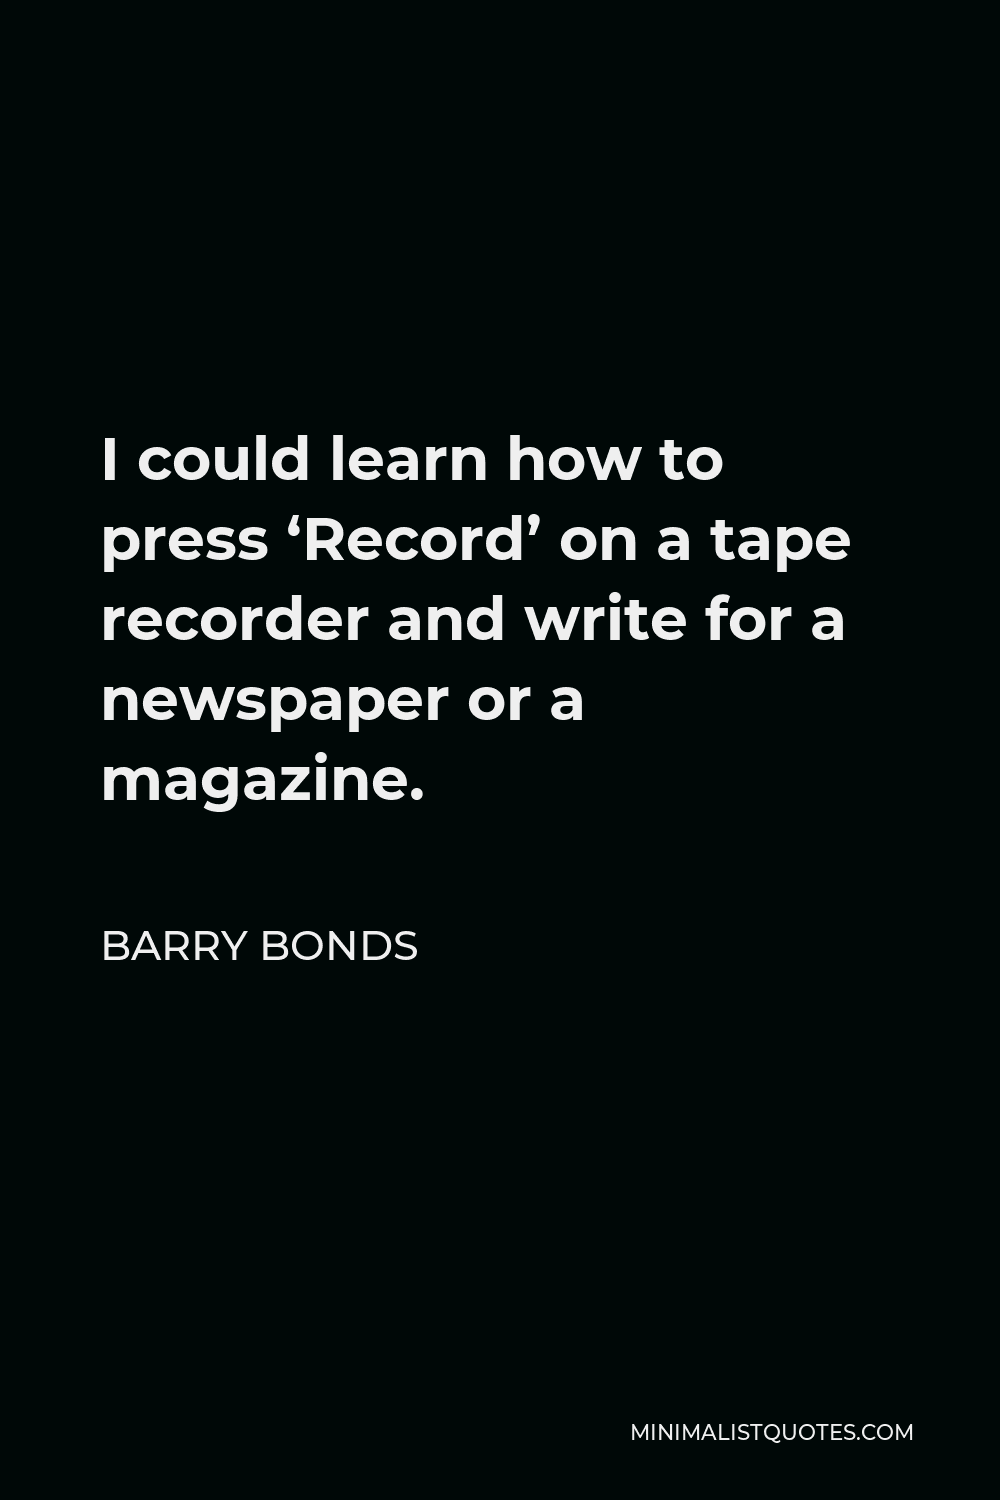 Barry Bonds Quote - I could learn how to press ‘Record’ on a tape recorder and write for a newspaper or a magazine.